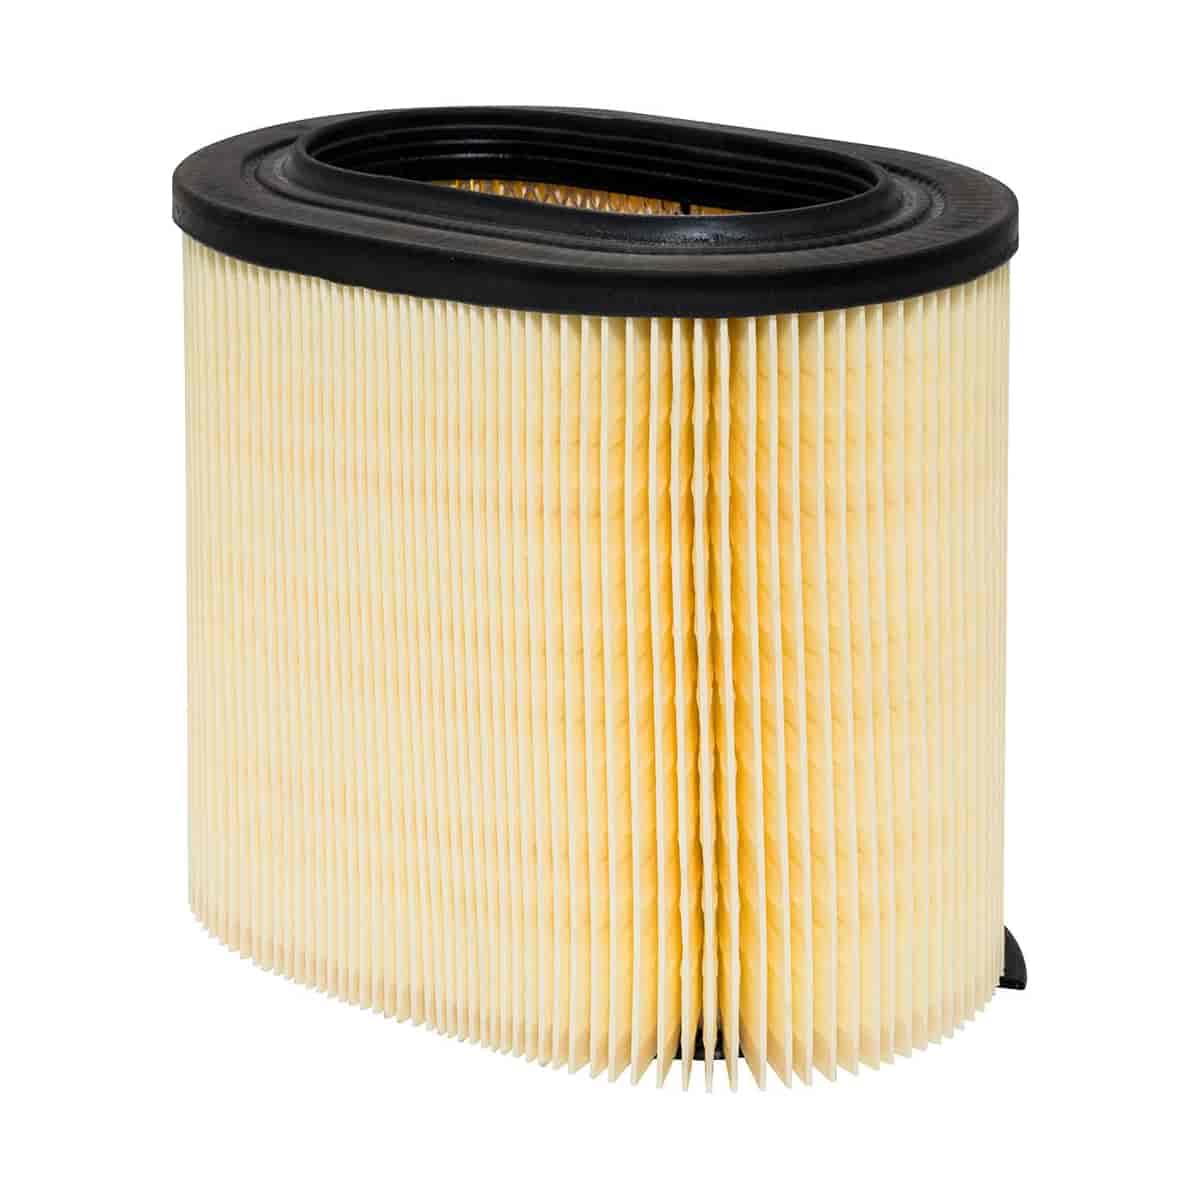 Air Filter for Ford F-Series Trucks